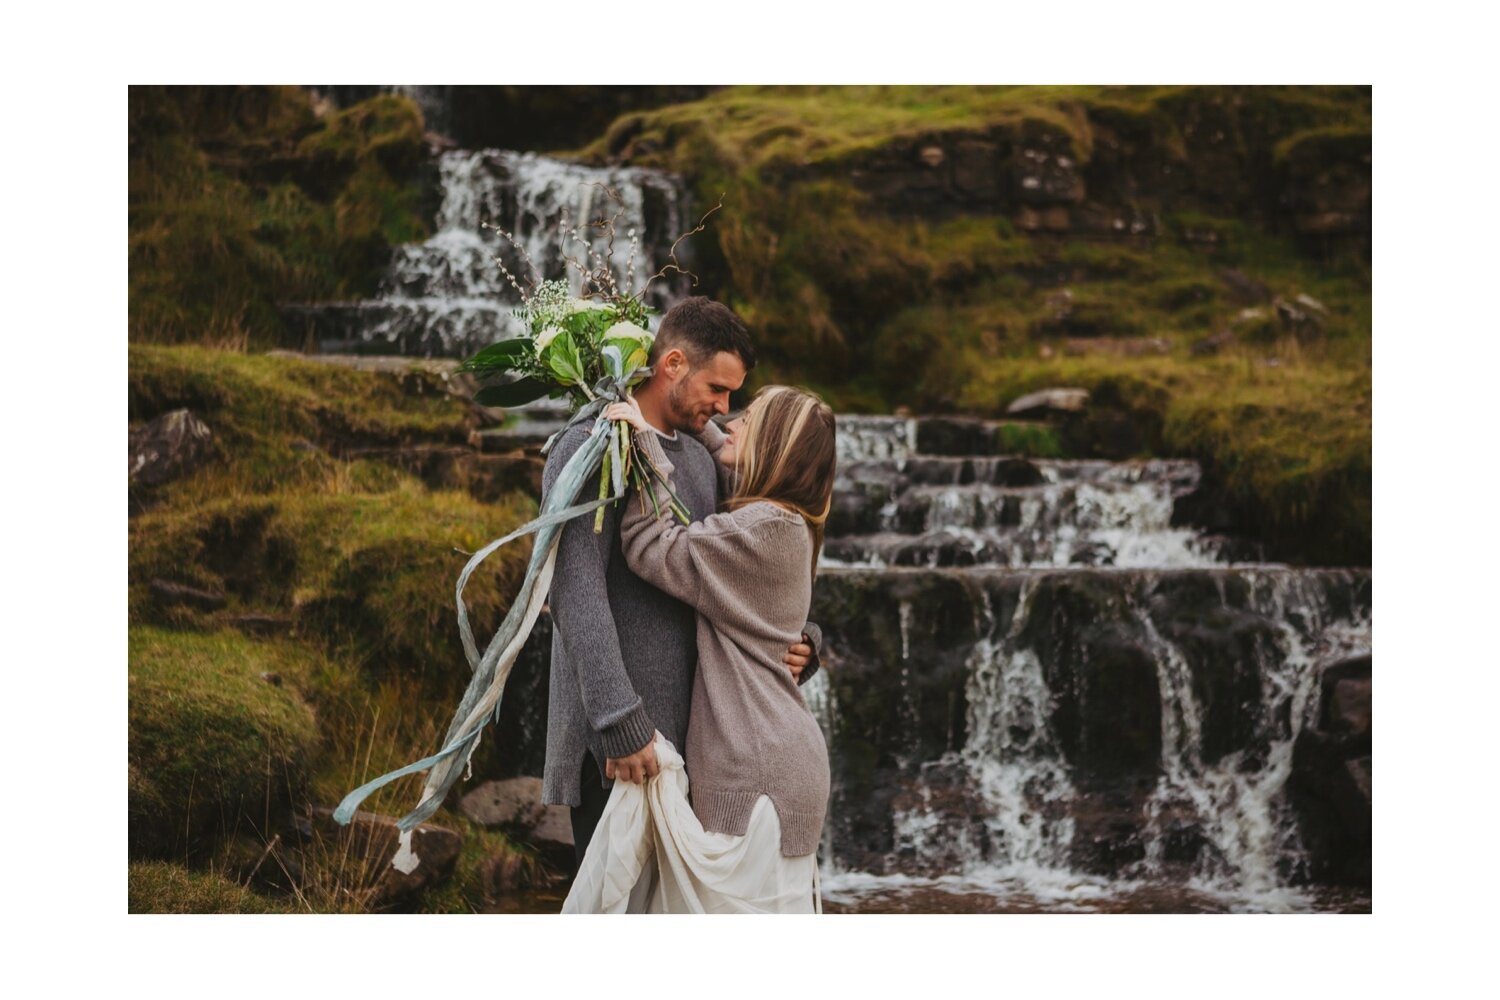 26_TWS-96__grey_dramatic_landscape_alternative_elope_alt_rock_blue_waterfall_winter_flowers_offbeat_dales_waterfalls_autumn_elopement_photography_ribbons_moody_bride_silver_wedding_yorkshire_rainy_cloudy_cosy_weather_photographer_florals_groom.jpg